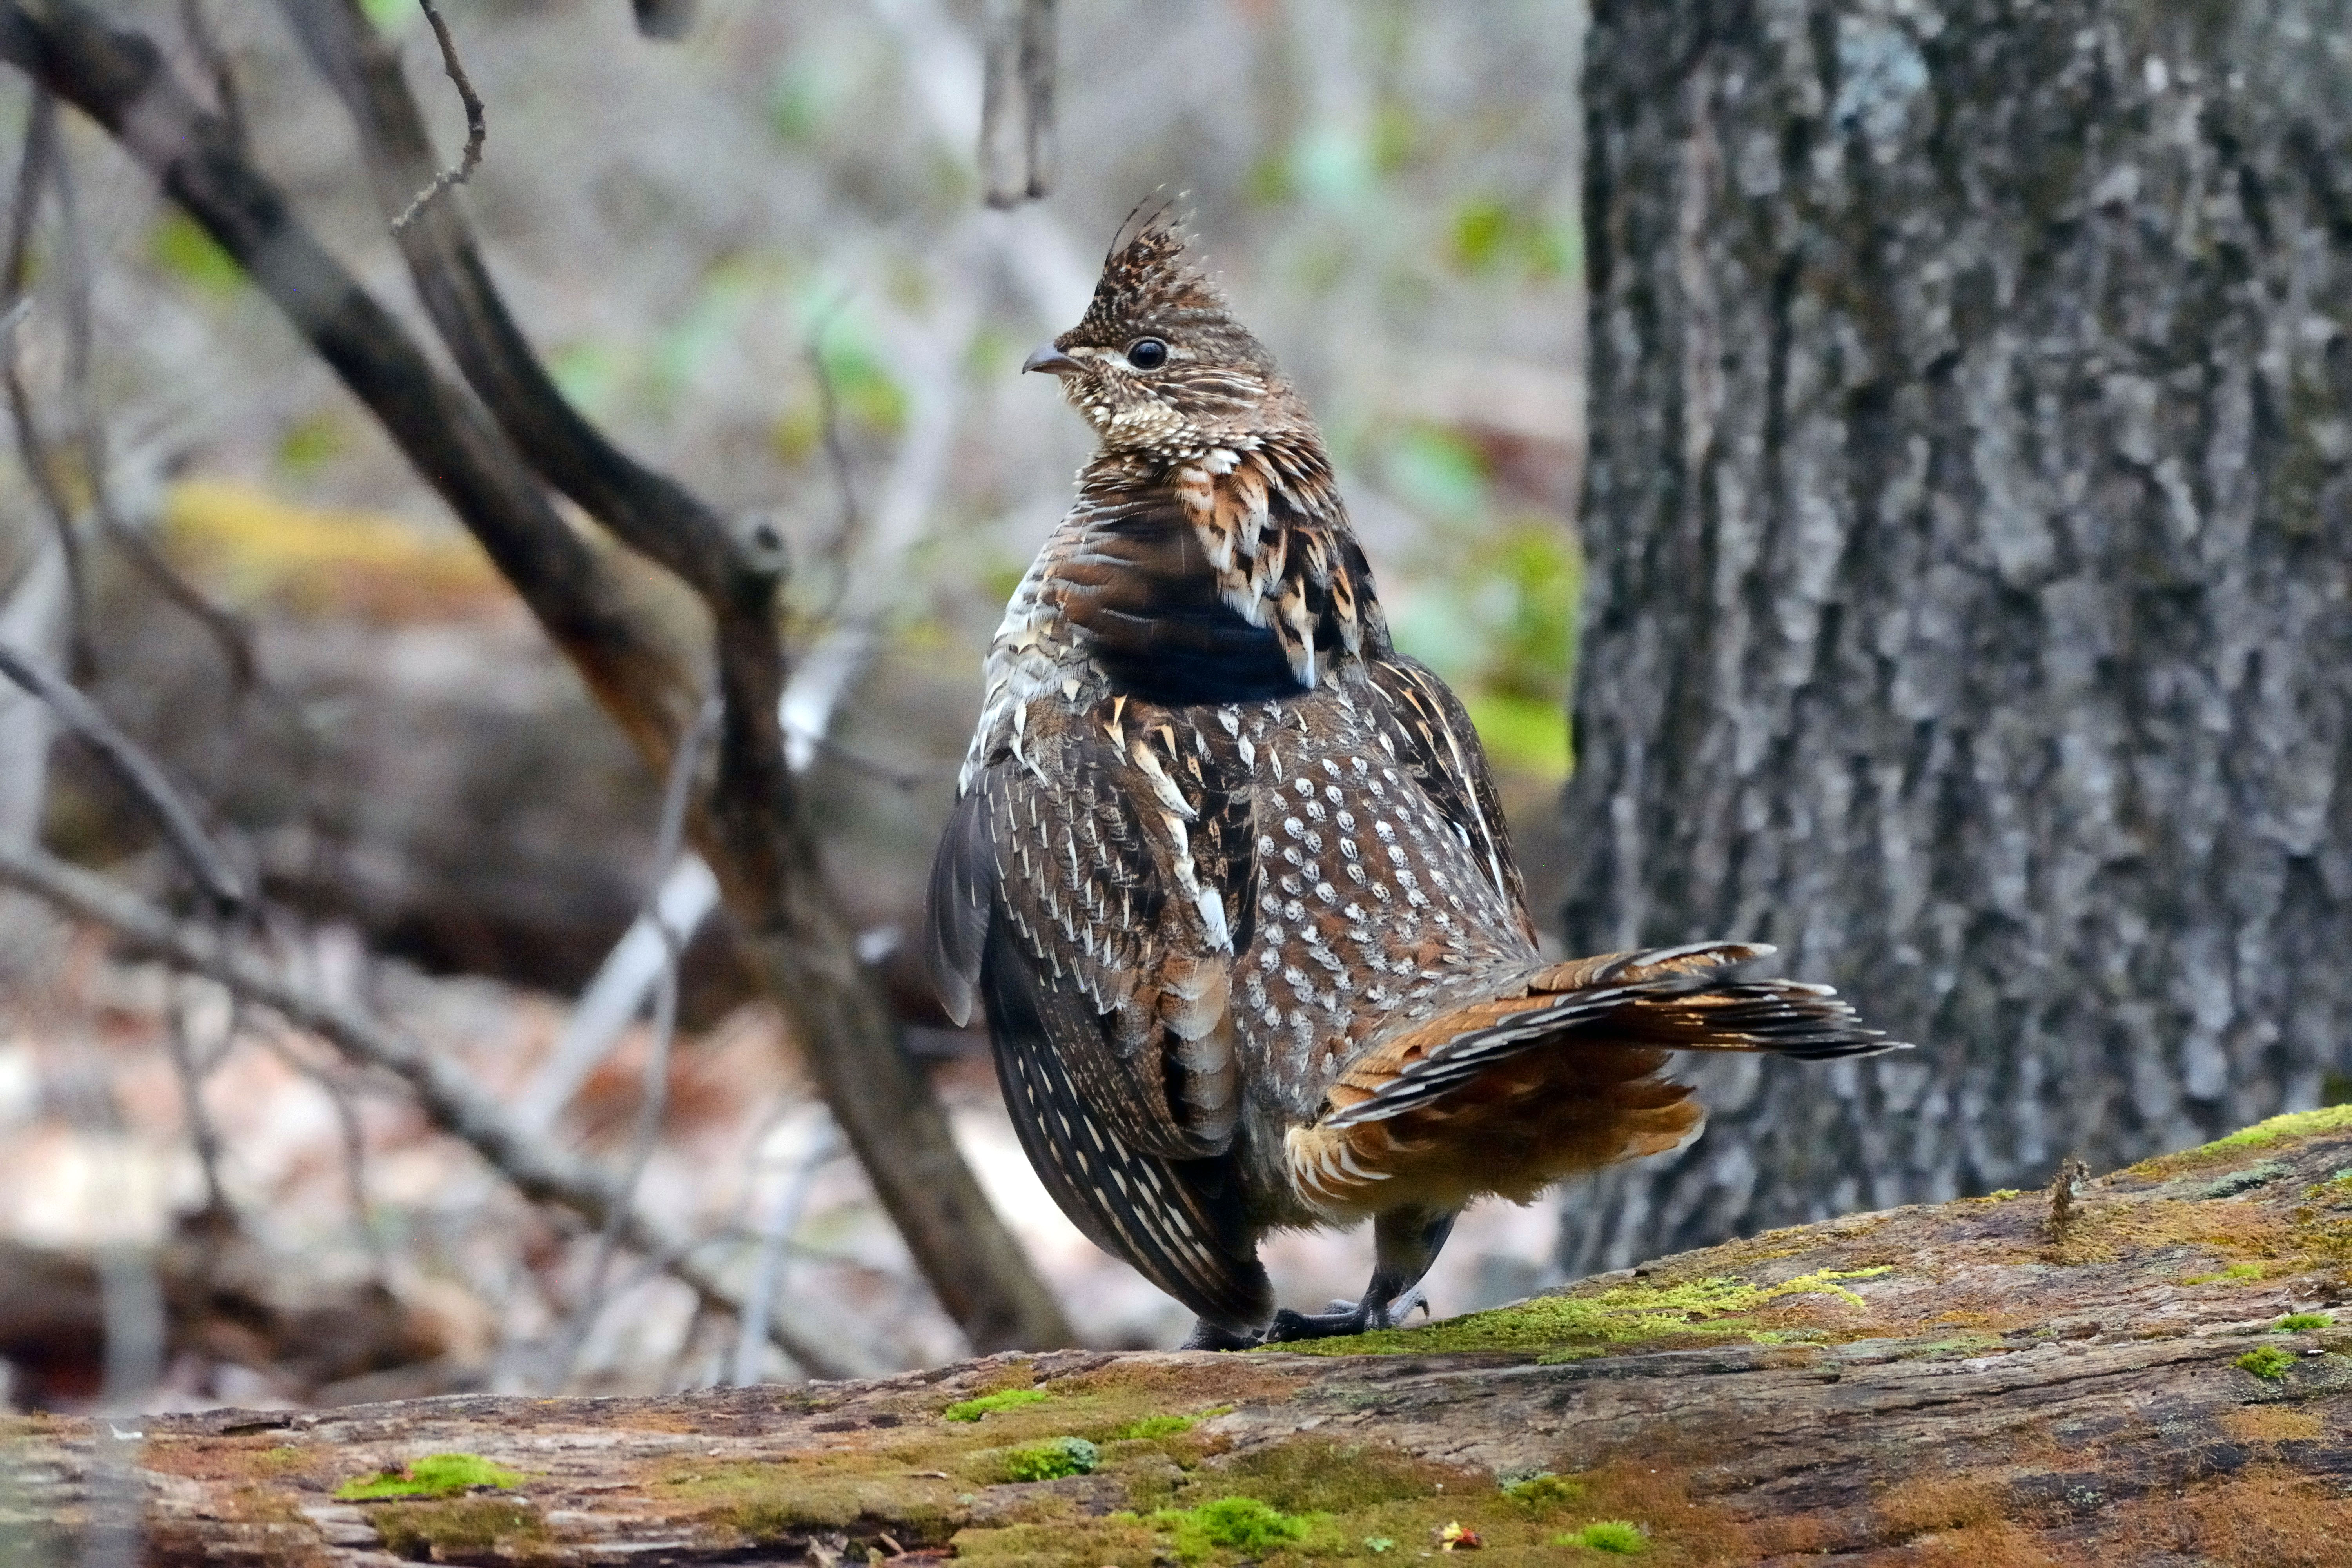 A large brown bird with white spots stands on a fallen log in the forest.